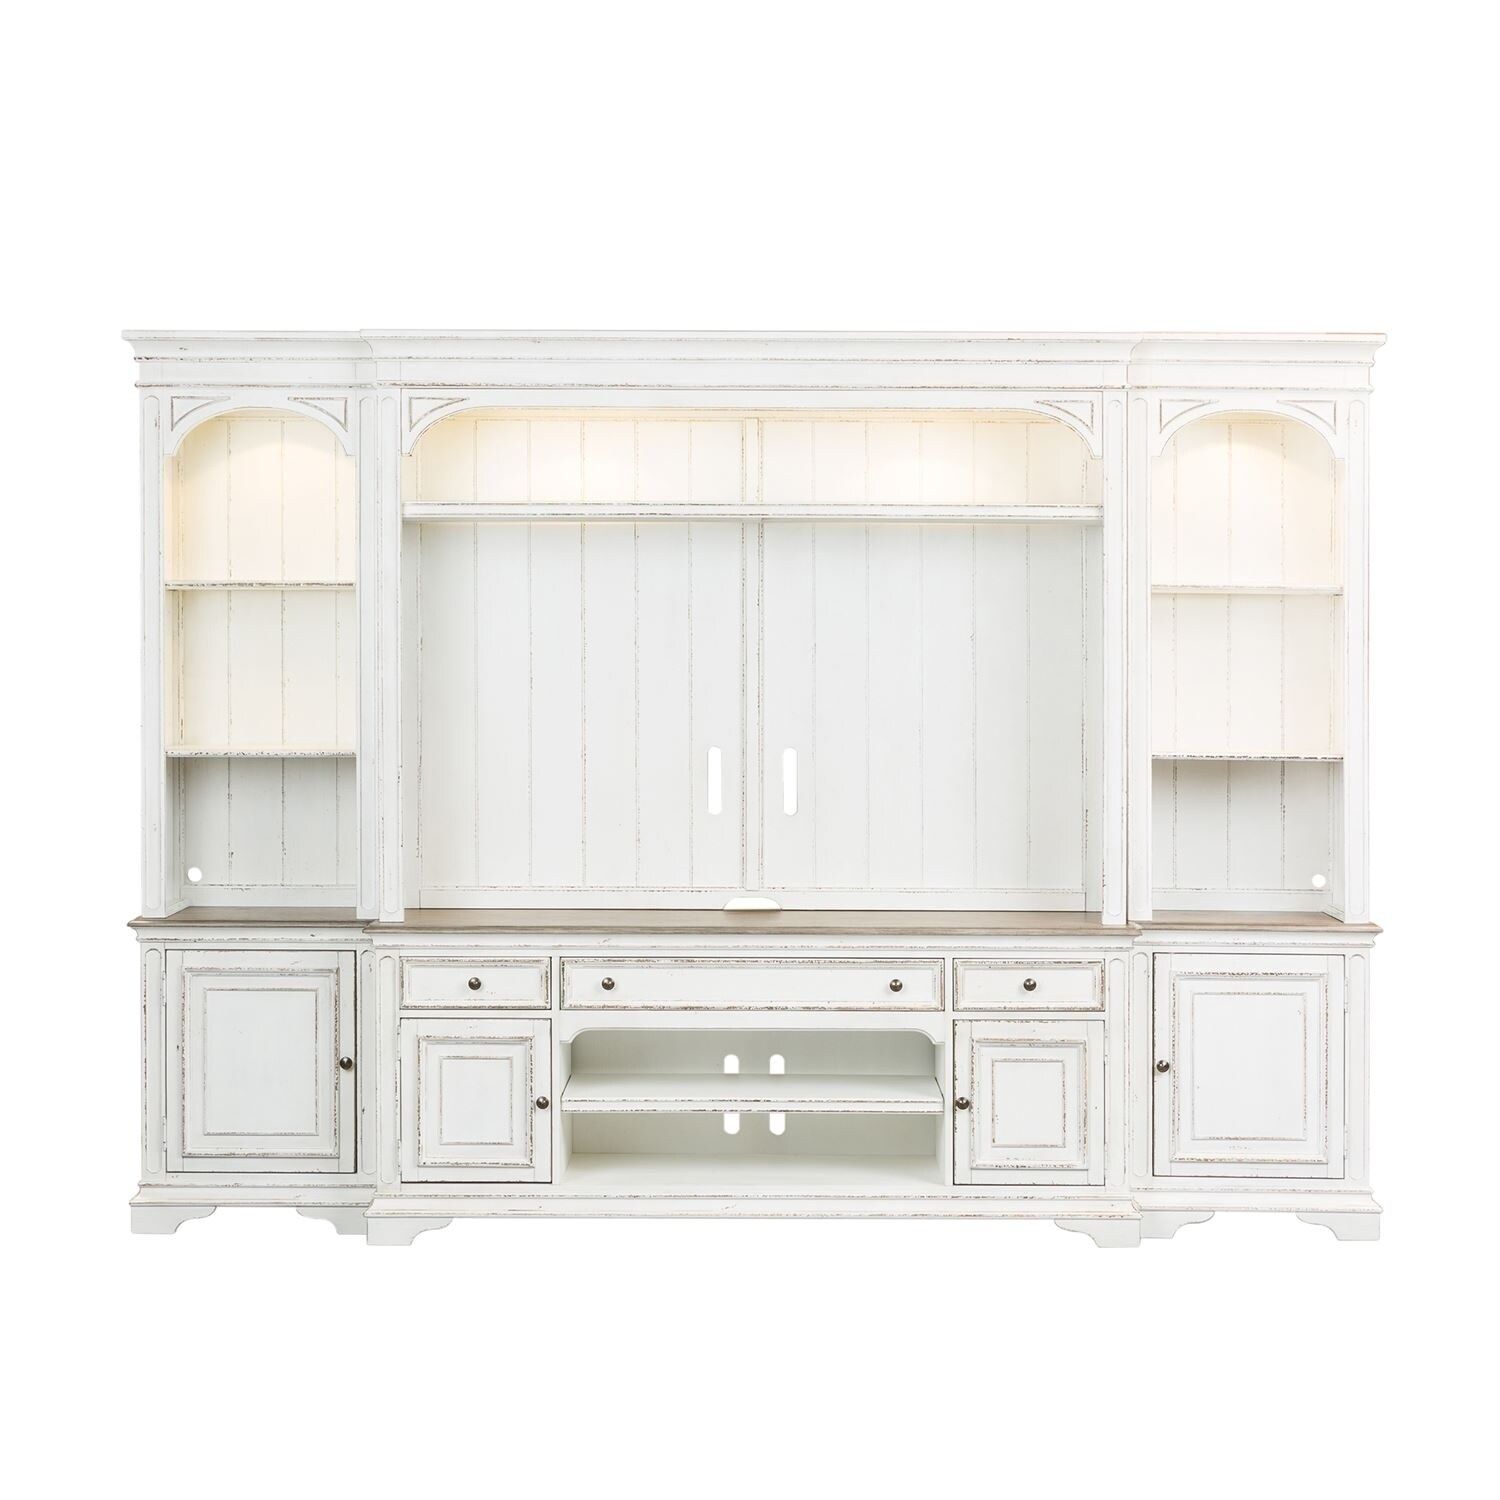 Magnolia Manor Antique White Entertainment Center with Piers - 73 inches in width | Bed Bath & Beyond